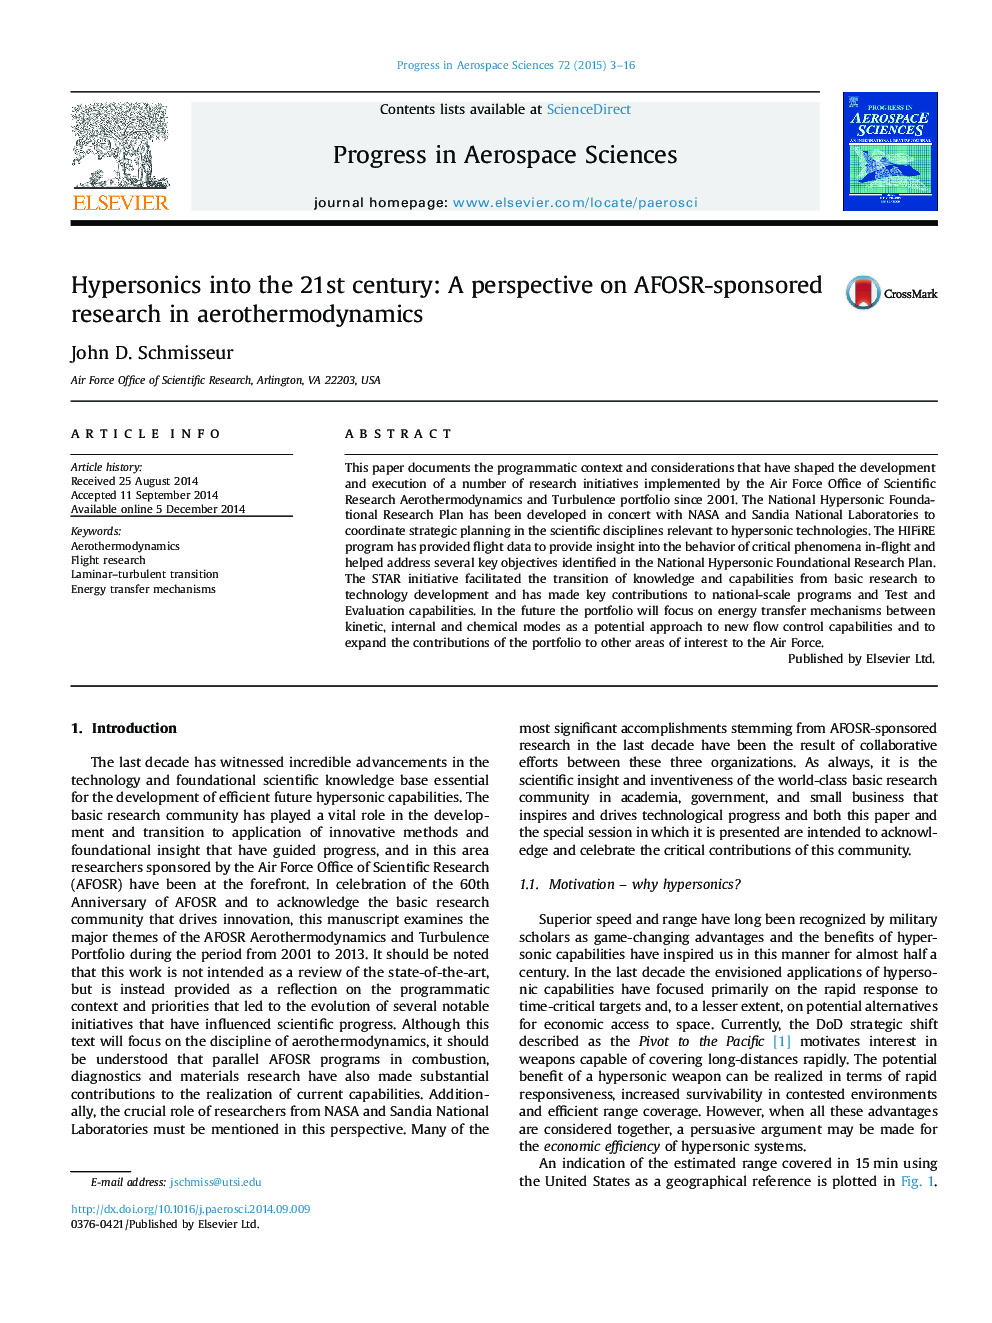 Hypersonics into the 21st century: A perspective on AFOSR-sponsored research in aerothermodynamics